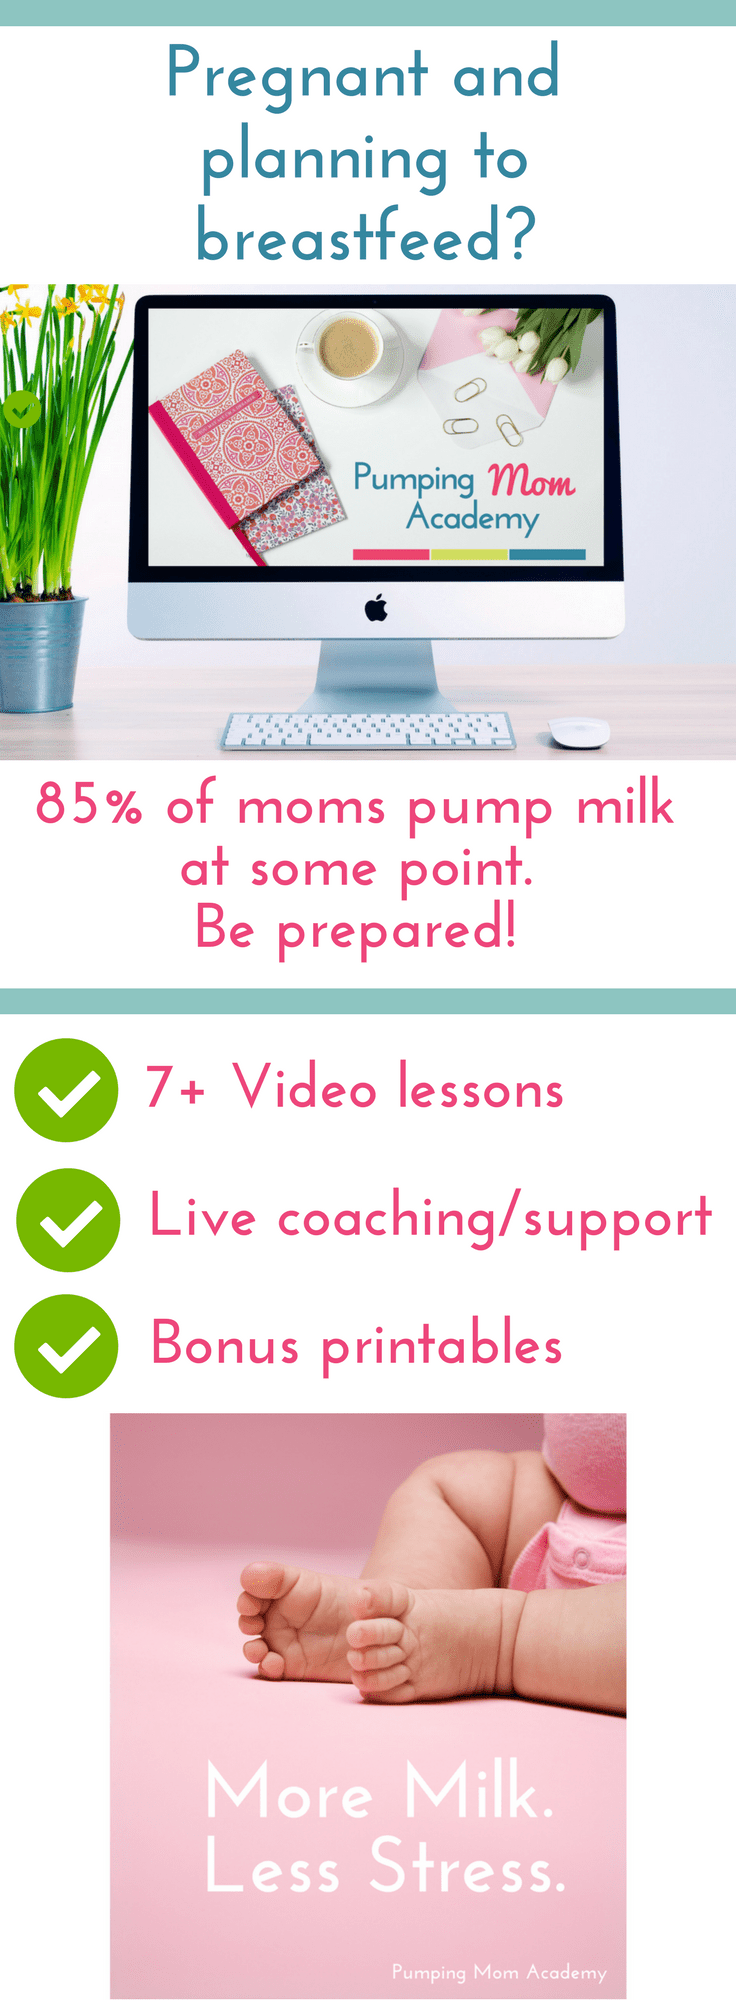 If you're pregnant and planning to breastfeed, you'll also need to learn about pumping! Most breastfeeding classes skip right over pumping, but 85% of moms have used a pump. Click to learn more about Pumping Mom Academy's new e-course! | Prepare for breastfeeding | Prepare for breastfeeding while pregnant | prepare for breastfeeding before birth | online breastfeeding class | breastfeeding and pumping | breastfeeding tips #breastmilk #breastfeeding #pumping #exclusivelypumping